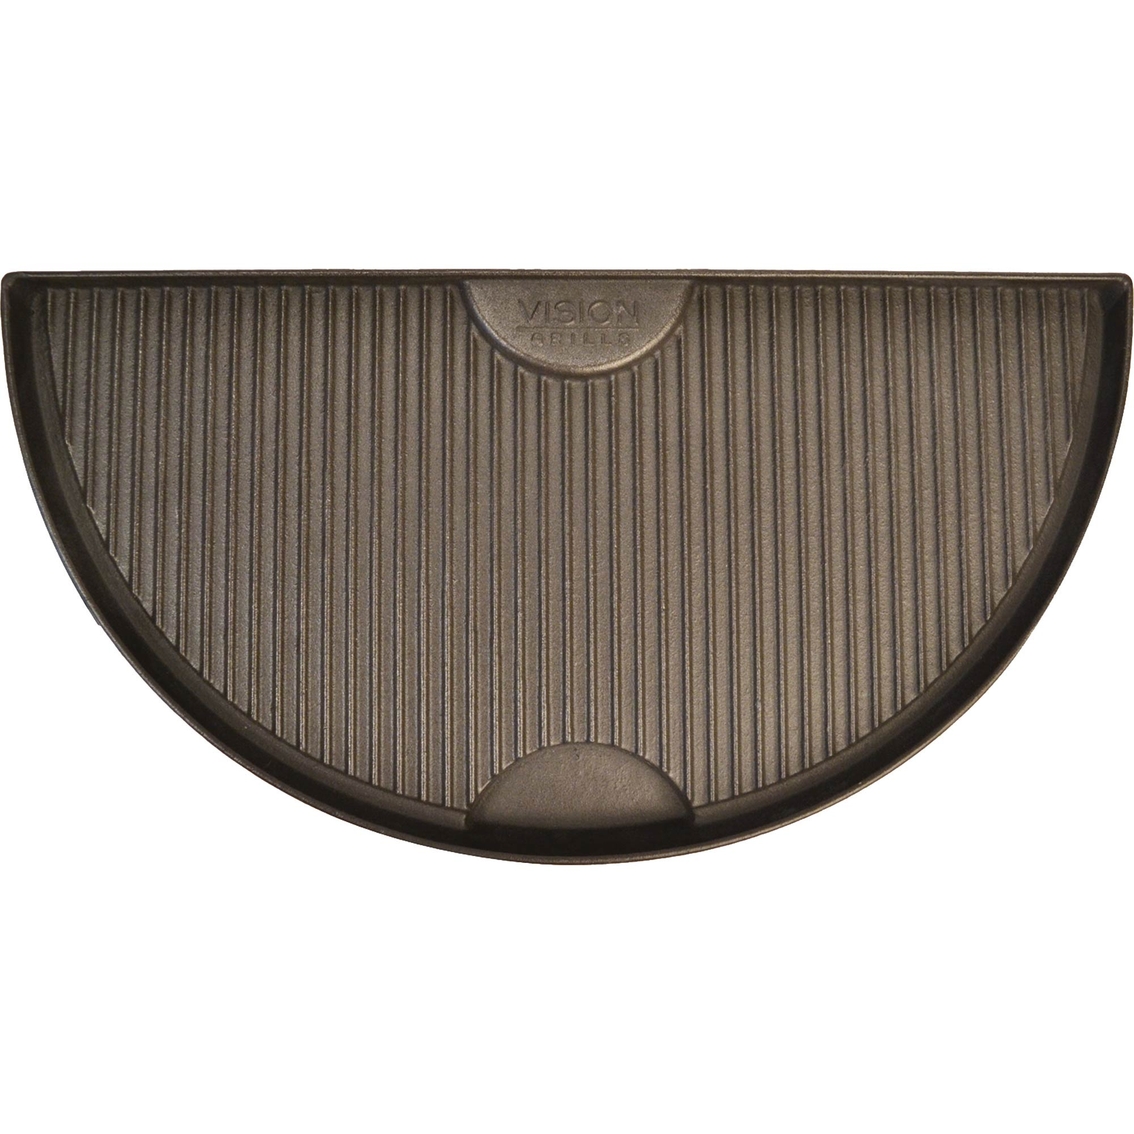 Vision Grills Cast Iron Half-moon Griddle | Grills & Smokers | Patio ...